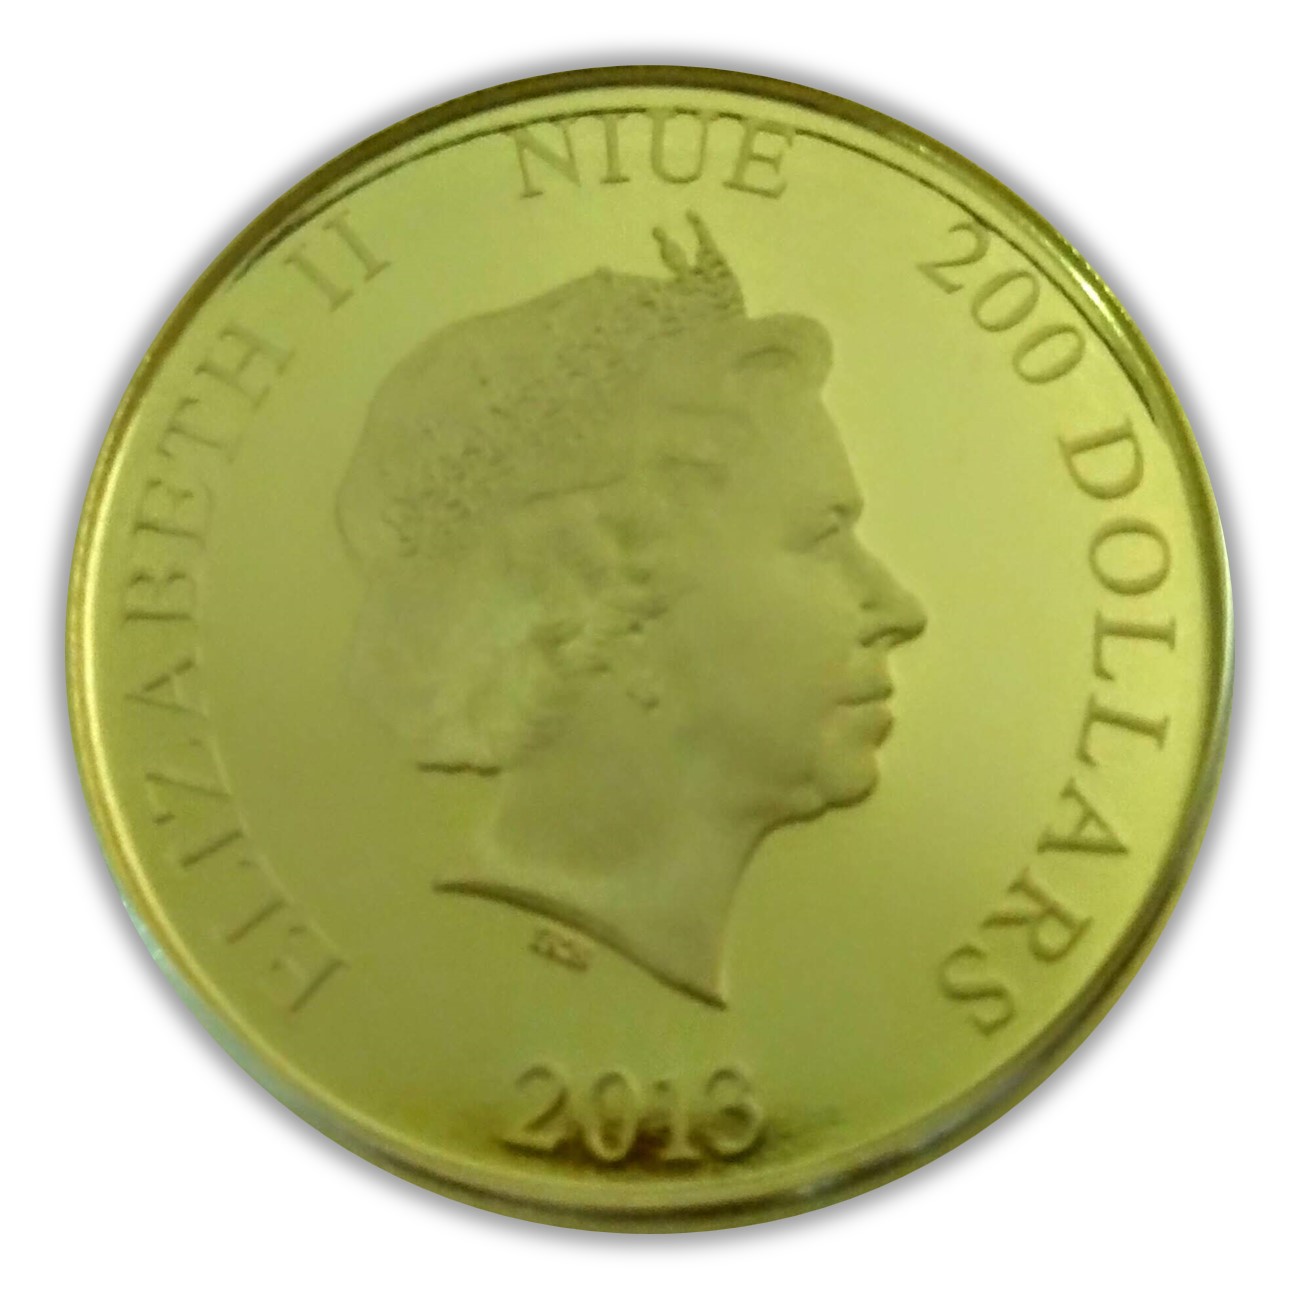 2013 Niue Doctor Who $200 Two Hundred Dollar Gold Proof Coin